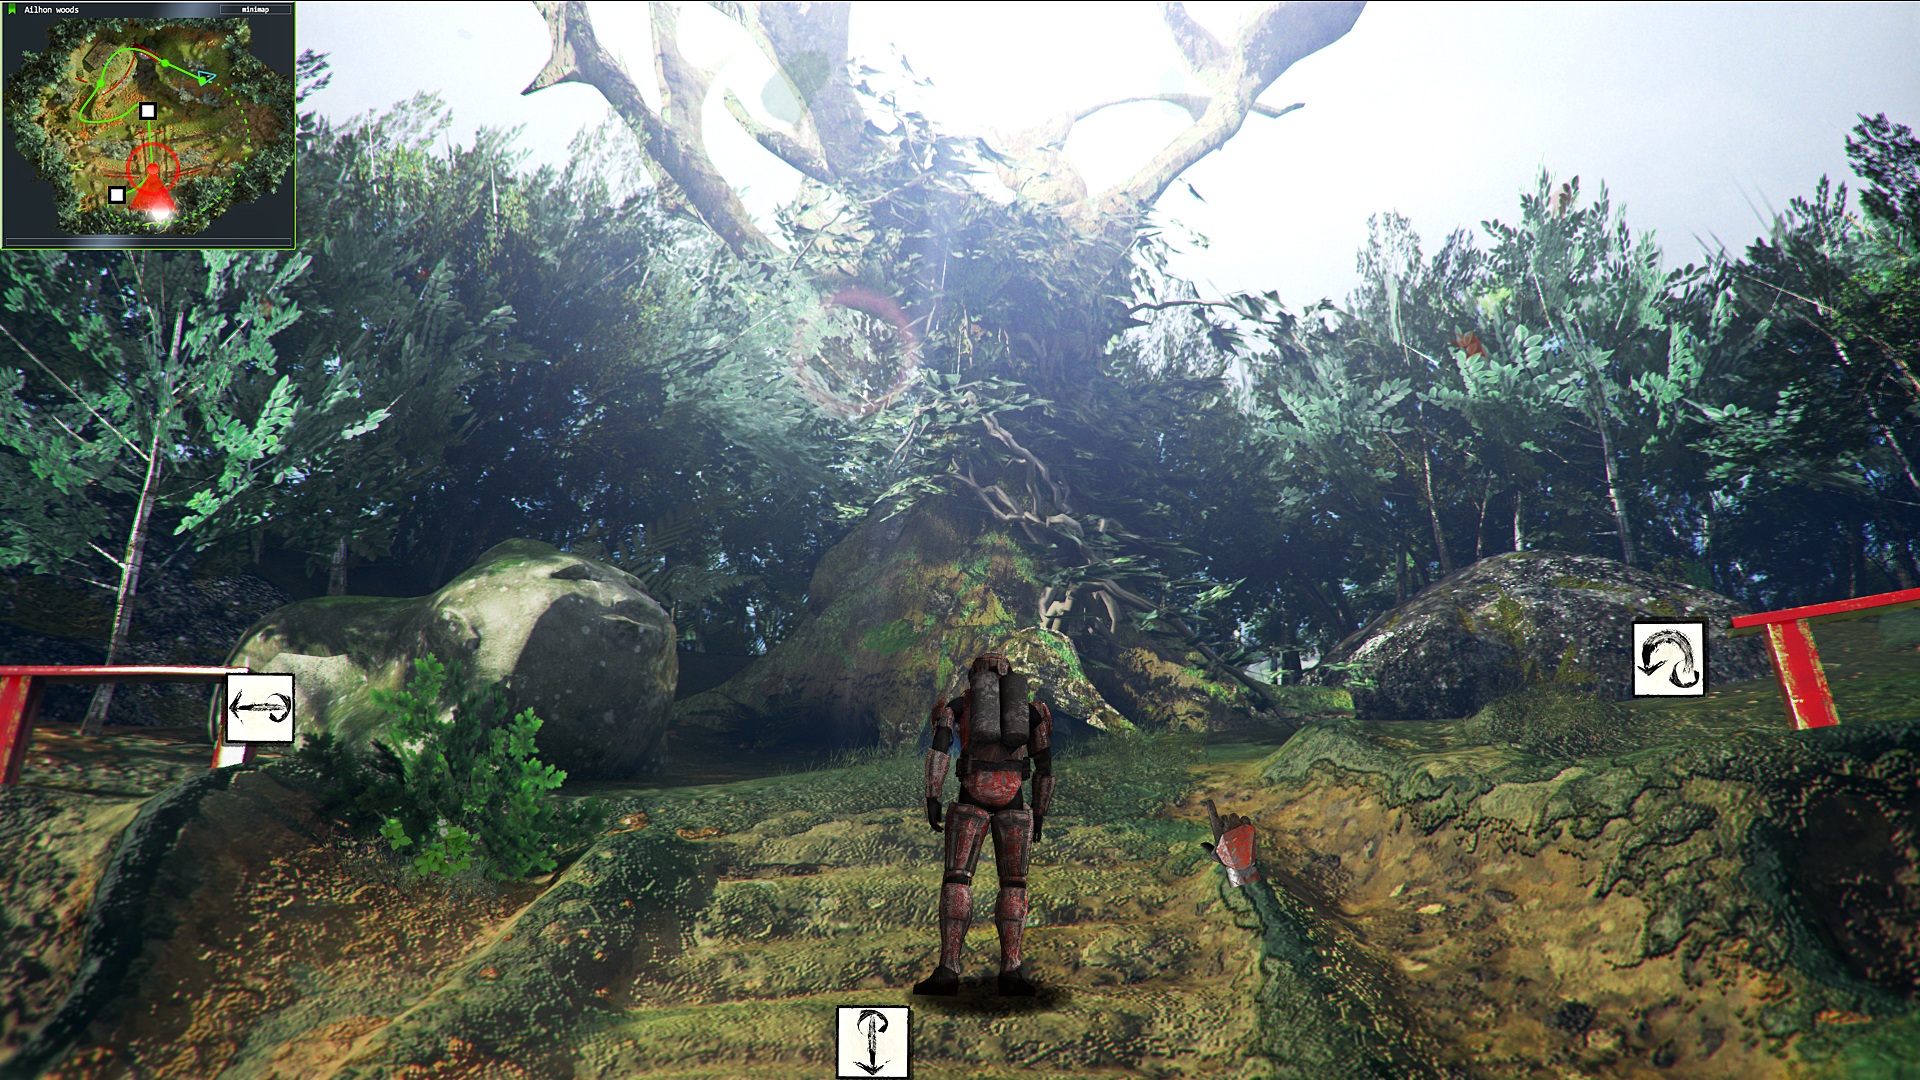 This is how Boinihi got its hybrid gameplay between Myst-like and 3rd-person adventure